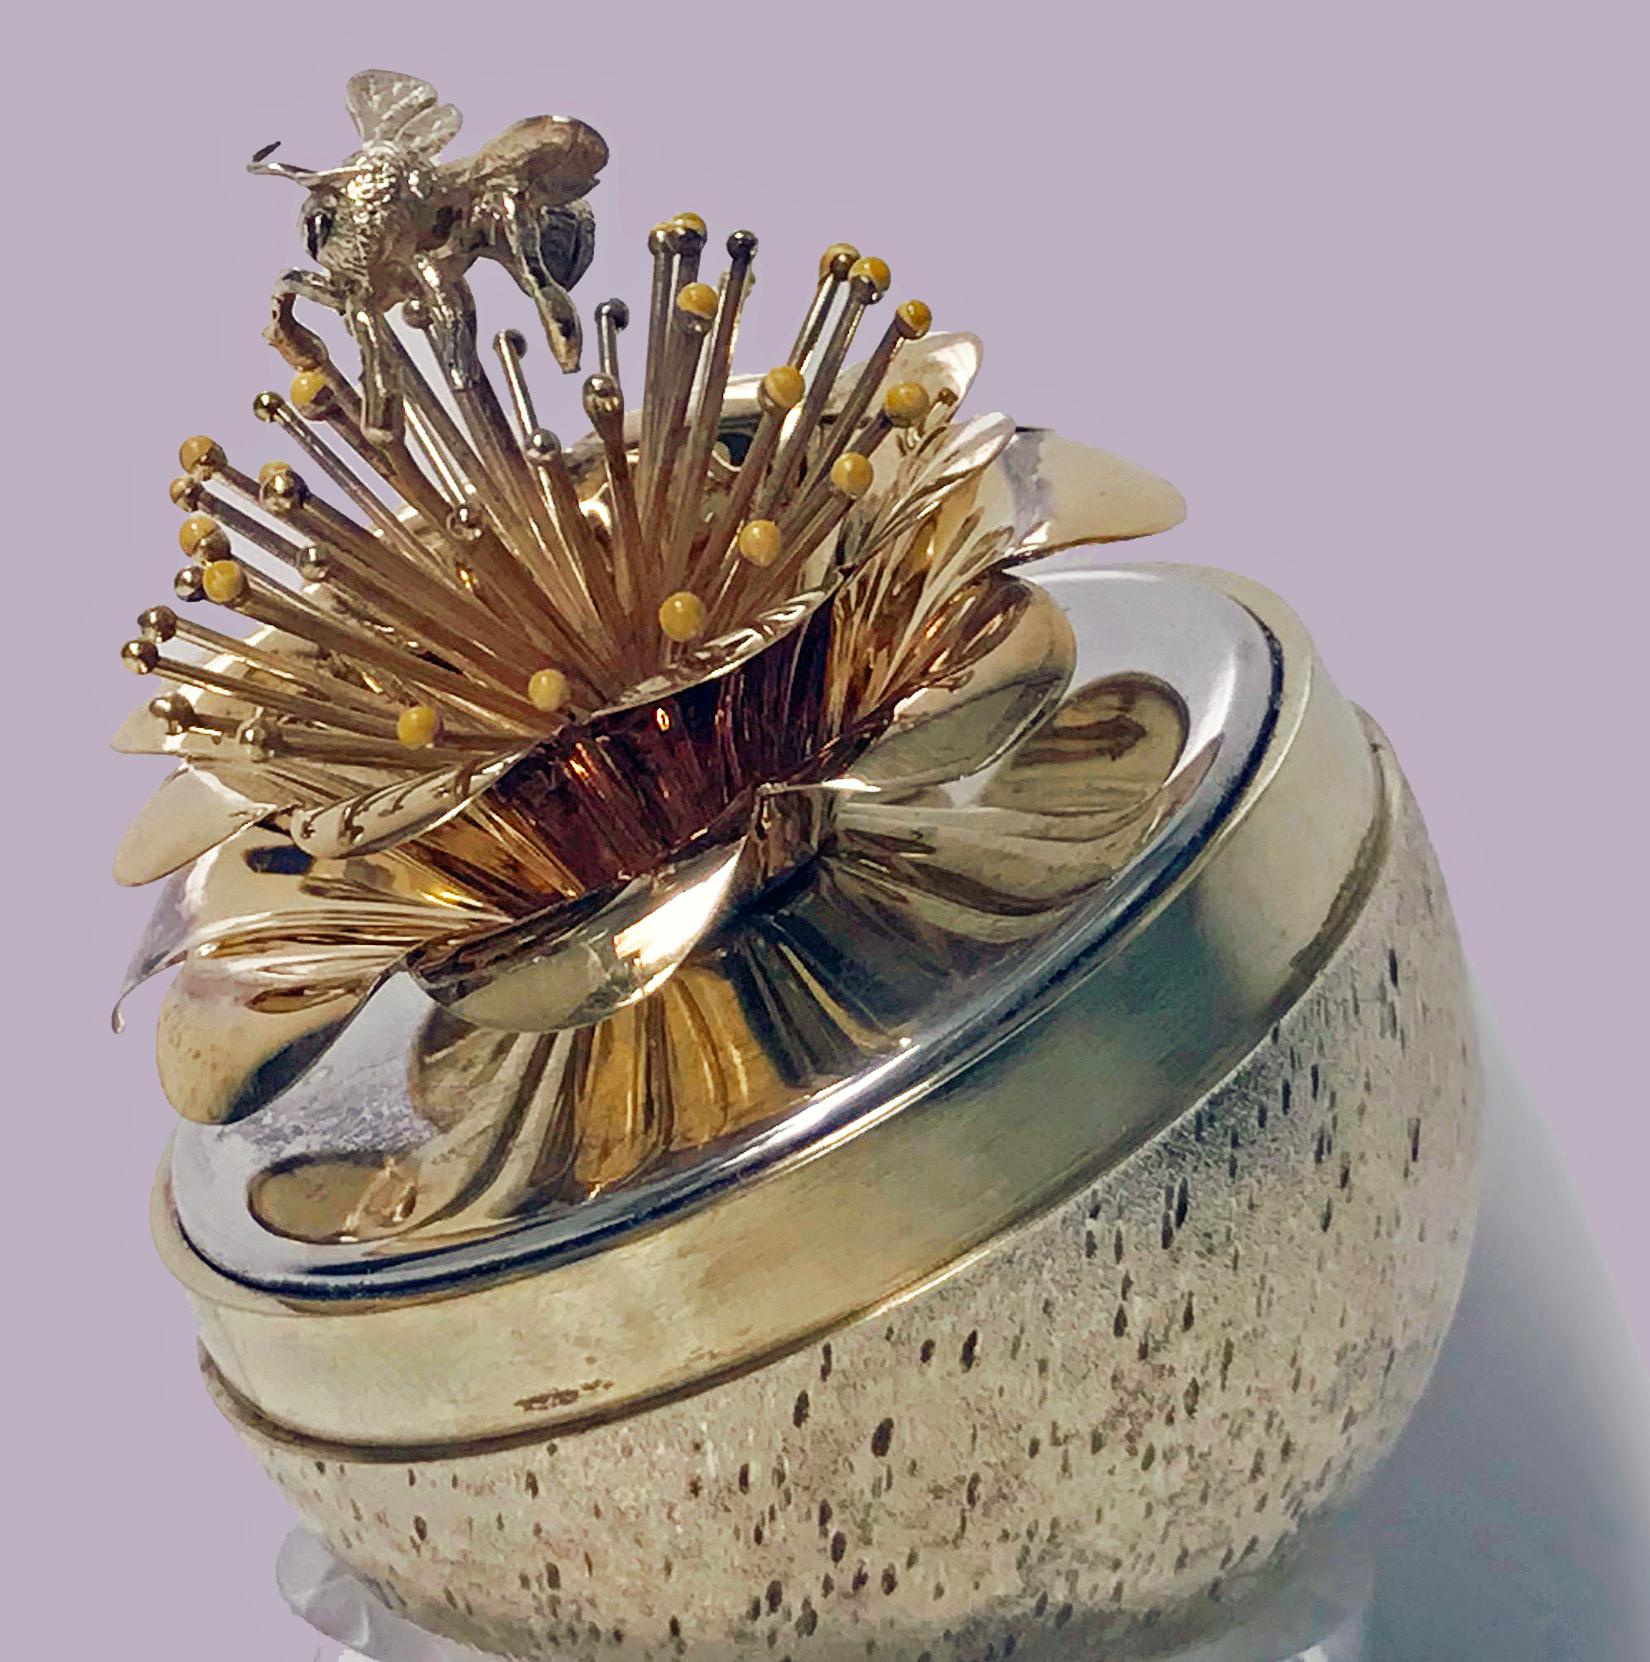 Stuart Devlin, silver parcel-gilt and enamel honey bee novelty surprise egg, London, 1981 limited edition 19/229, in its original box. The egg depicting a honey bee surmounted on a flower with yellow and gold buds. Measures: Height 7 cm. Weight: 119